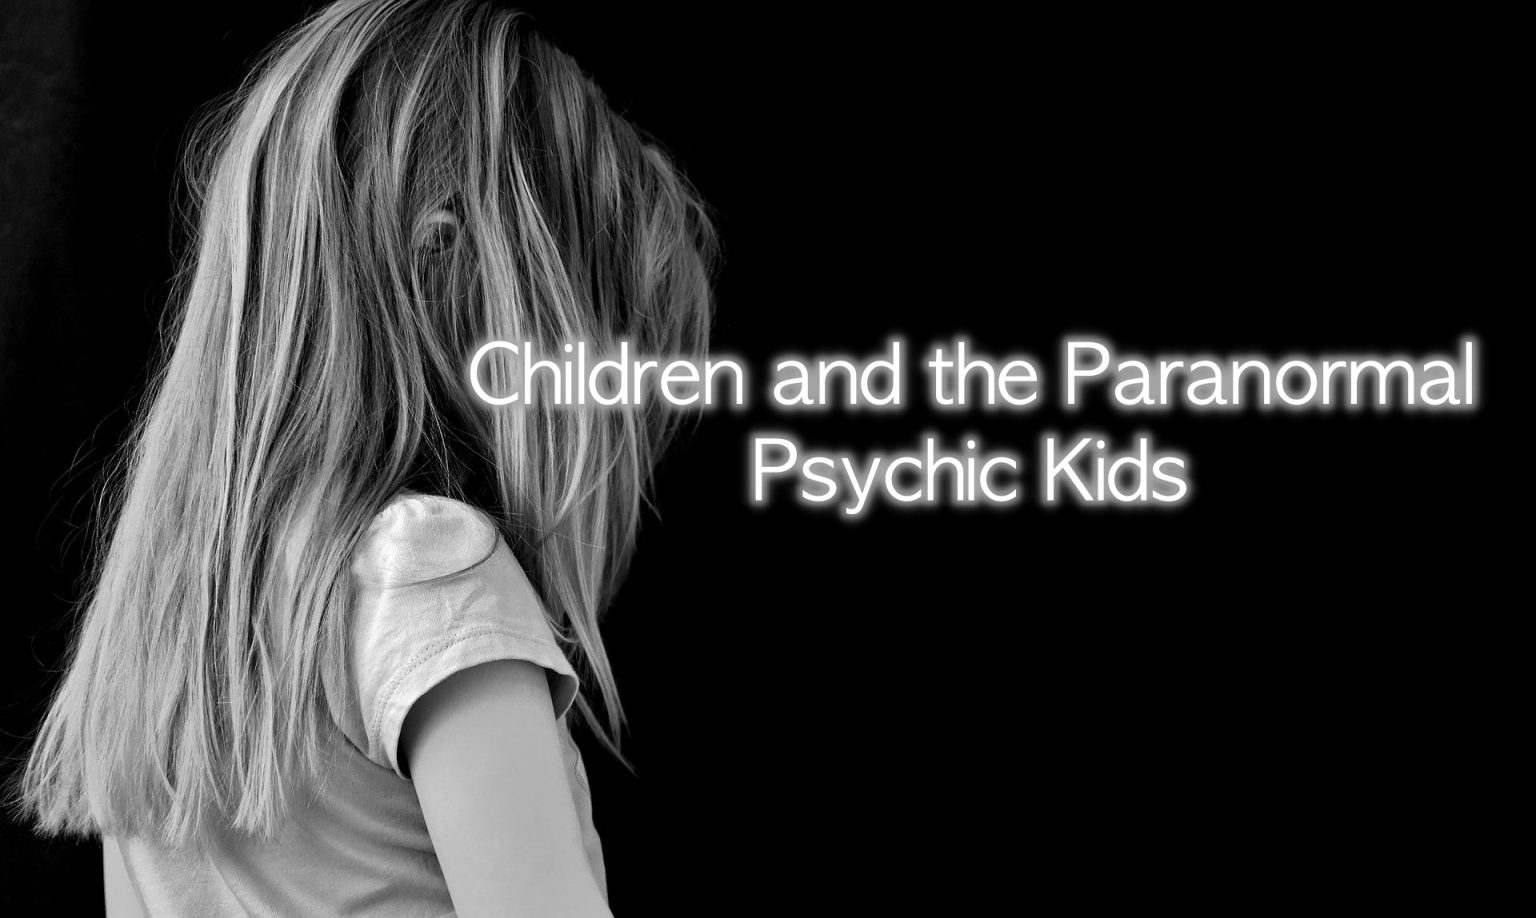 Children and the Paranormal